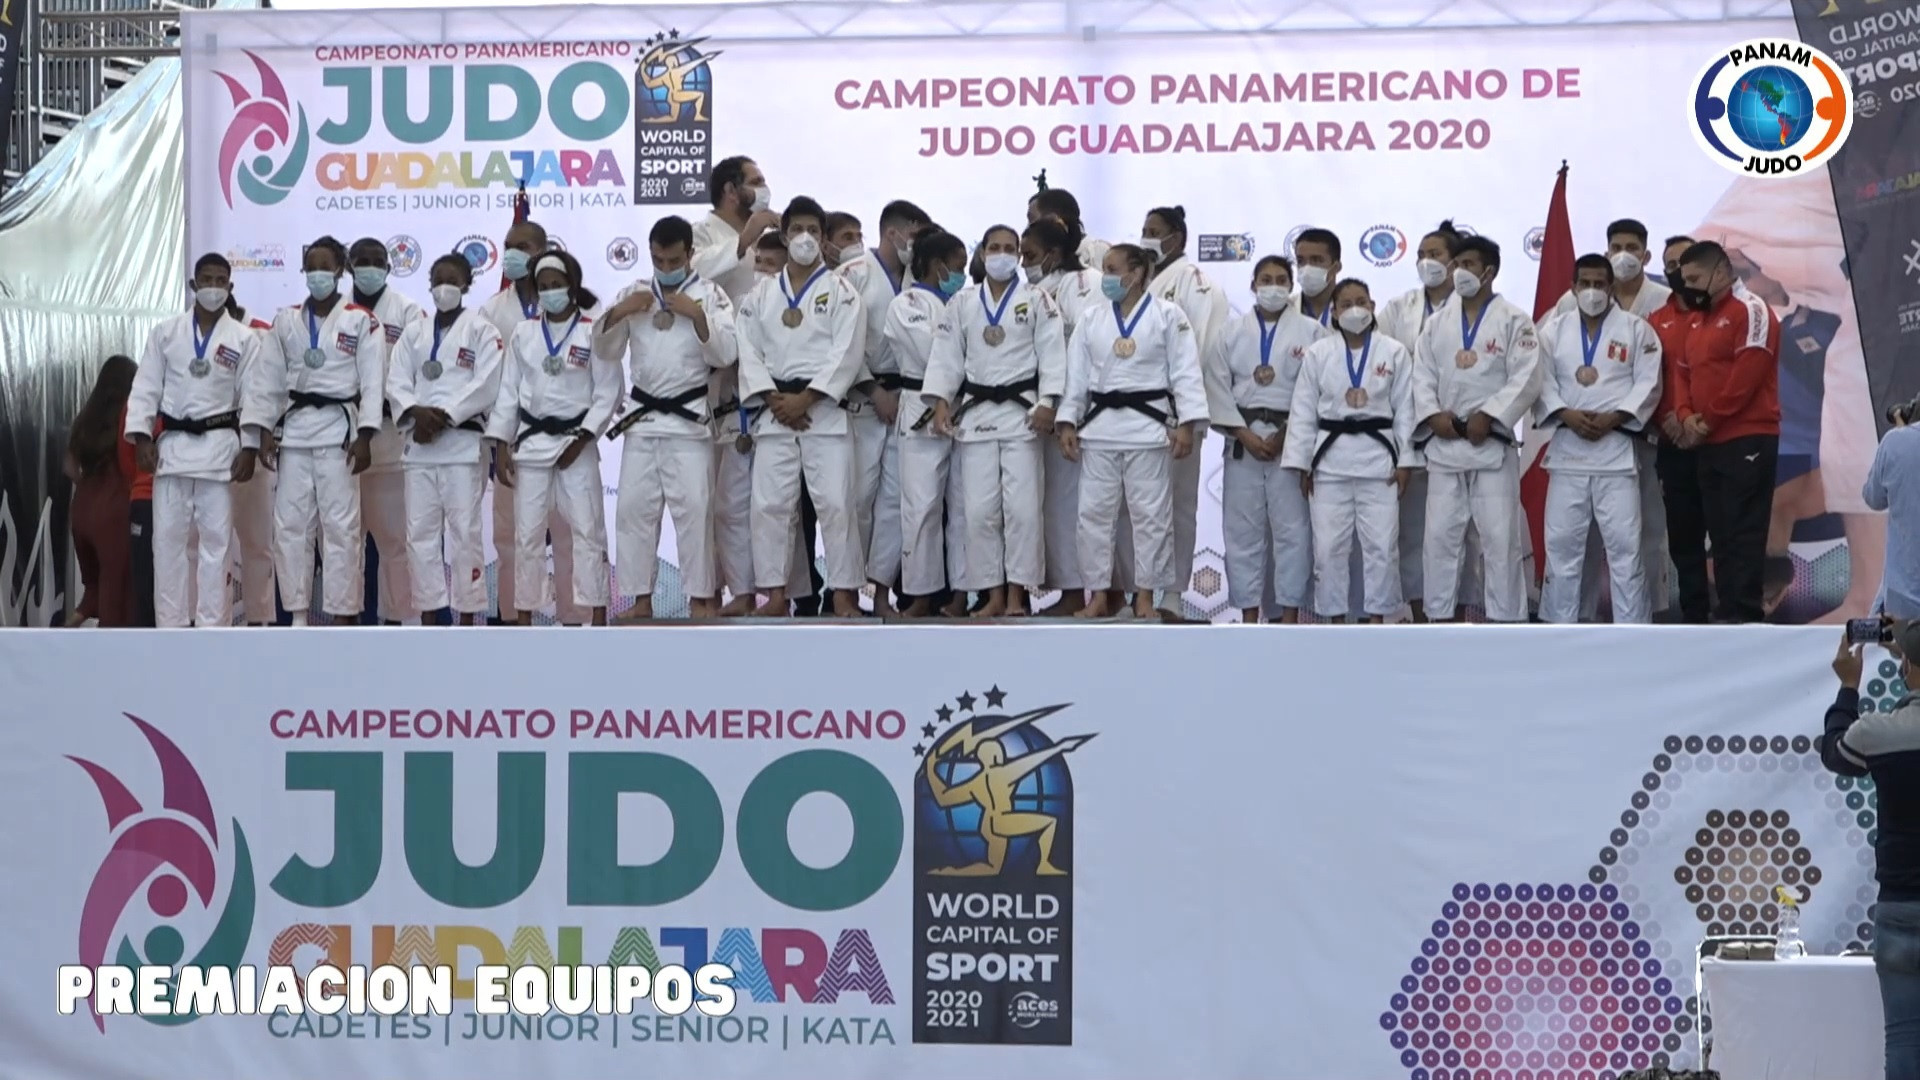 Pereira wins tie-breaker as Brazil clinch final gold at Pan American Judo Championships